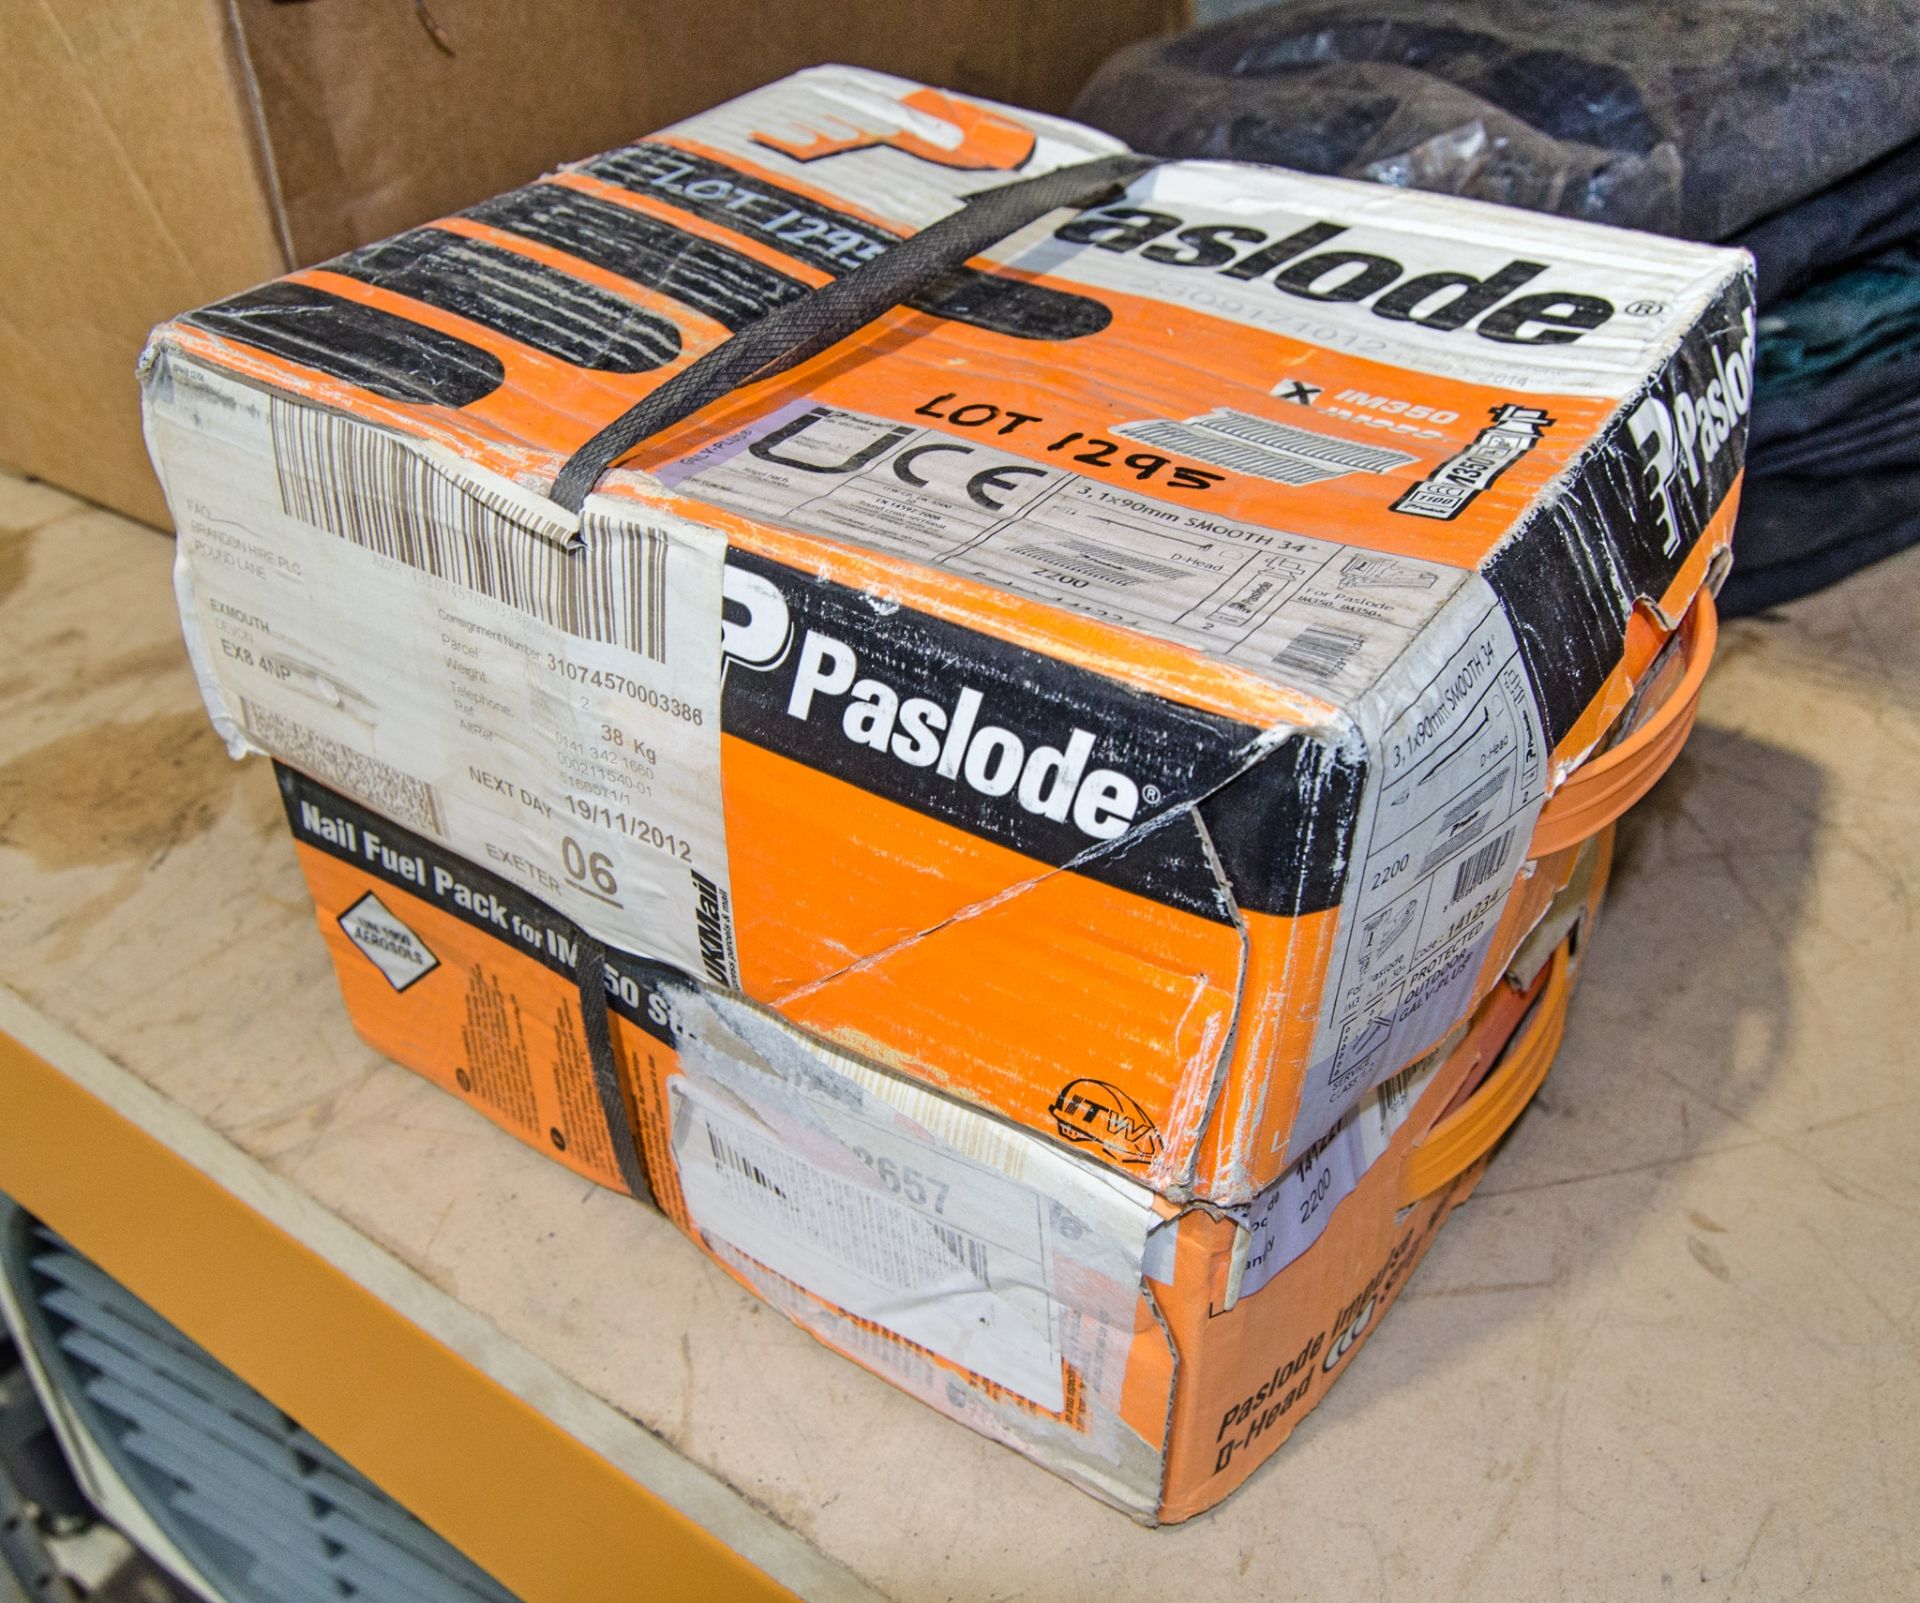 2 - boxes of Paslode IM350 nail and fuel packs